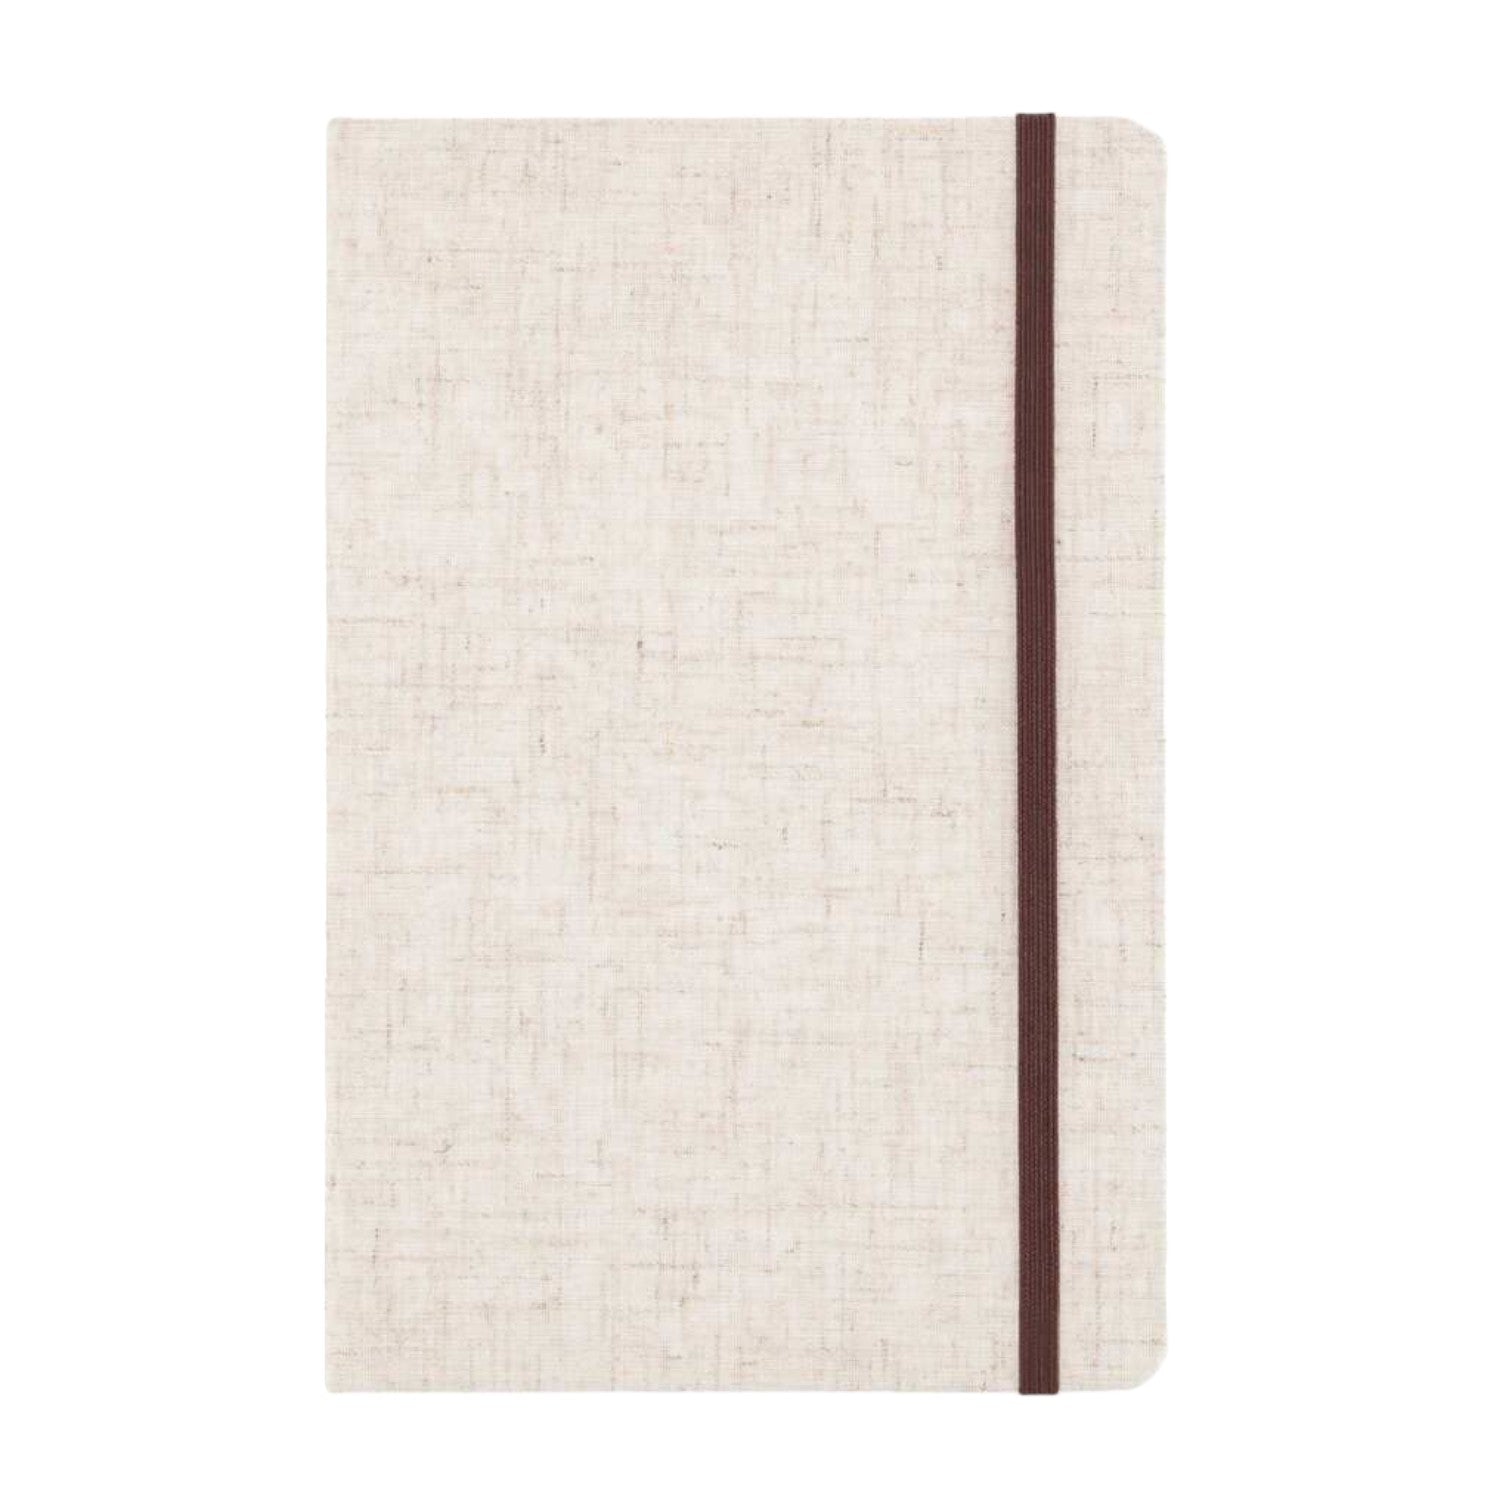 A5 Canvas Hard Cover Notebook